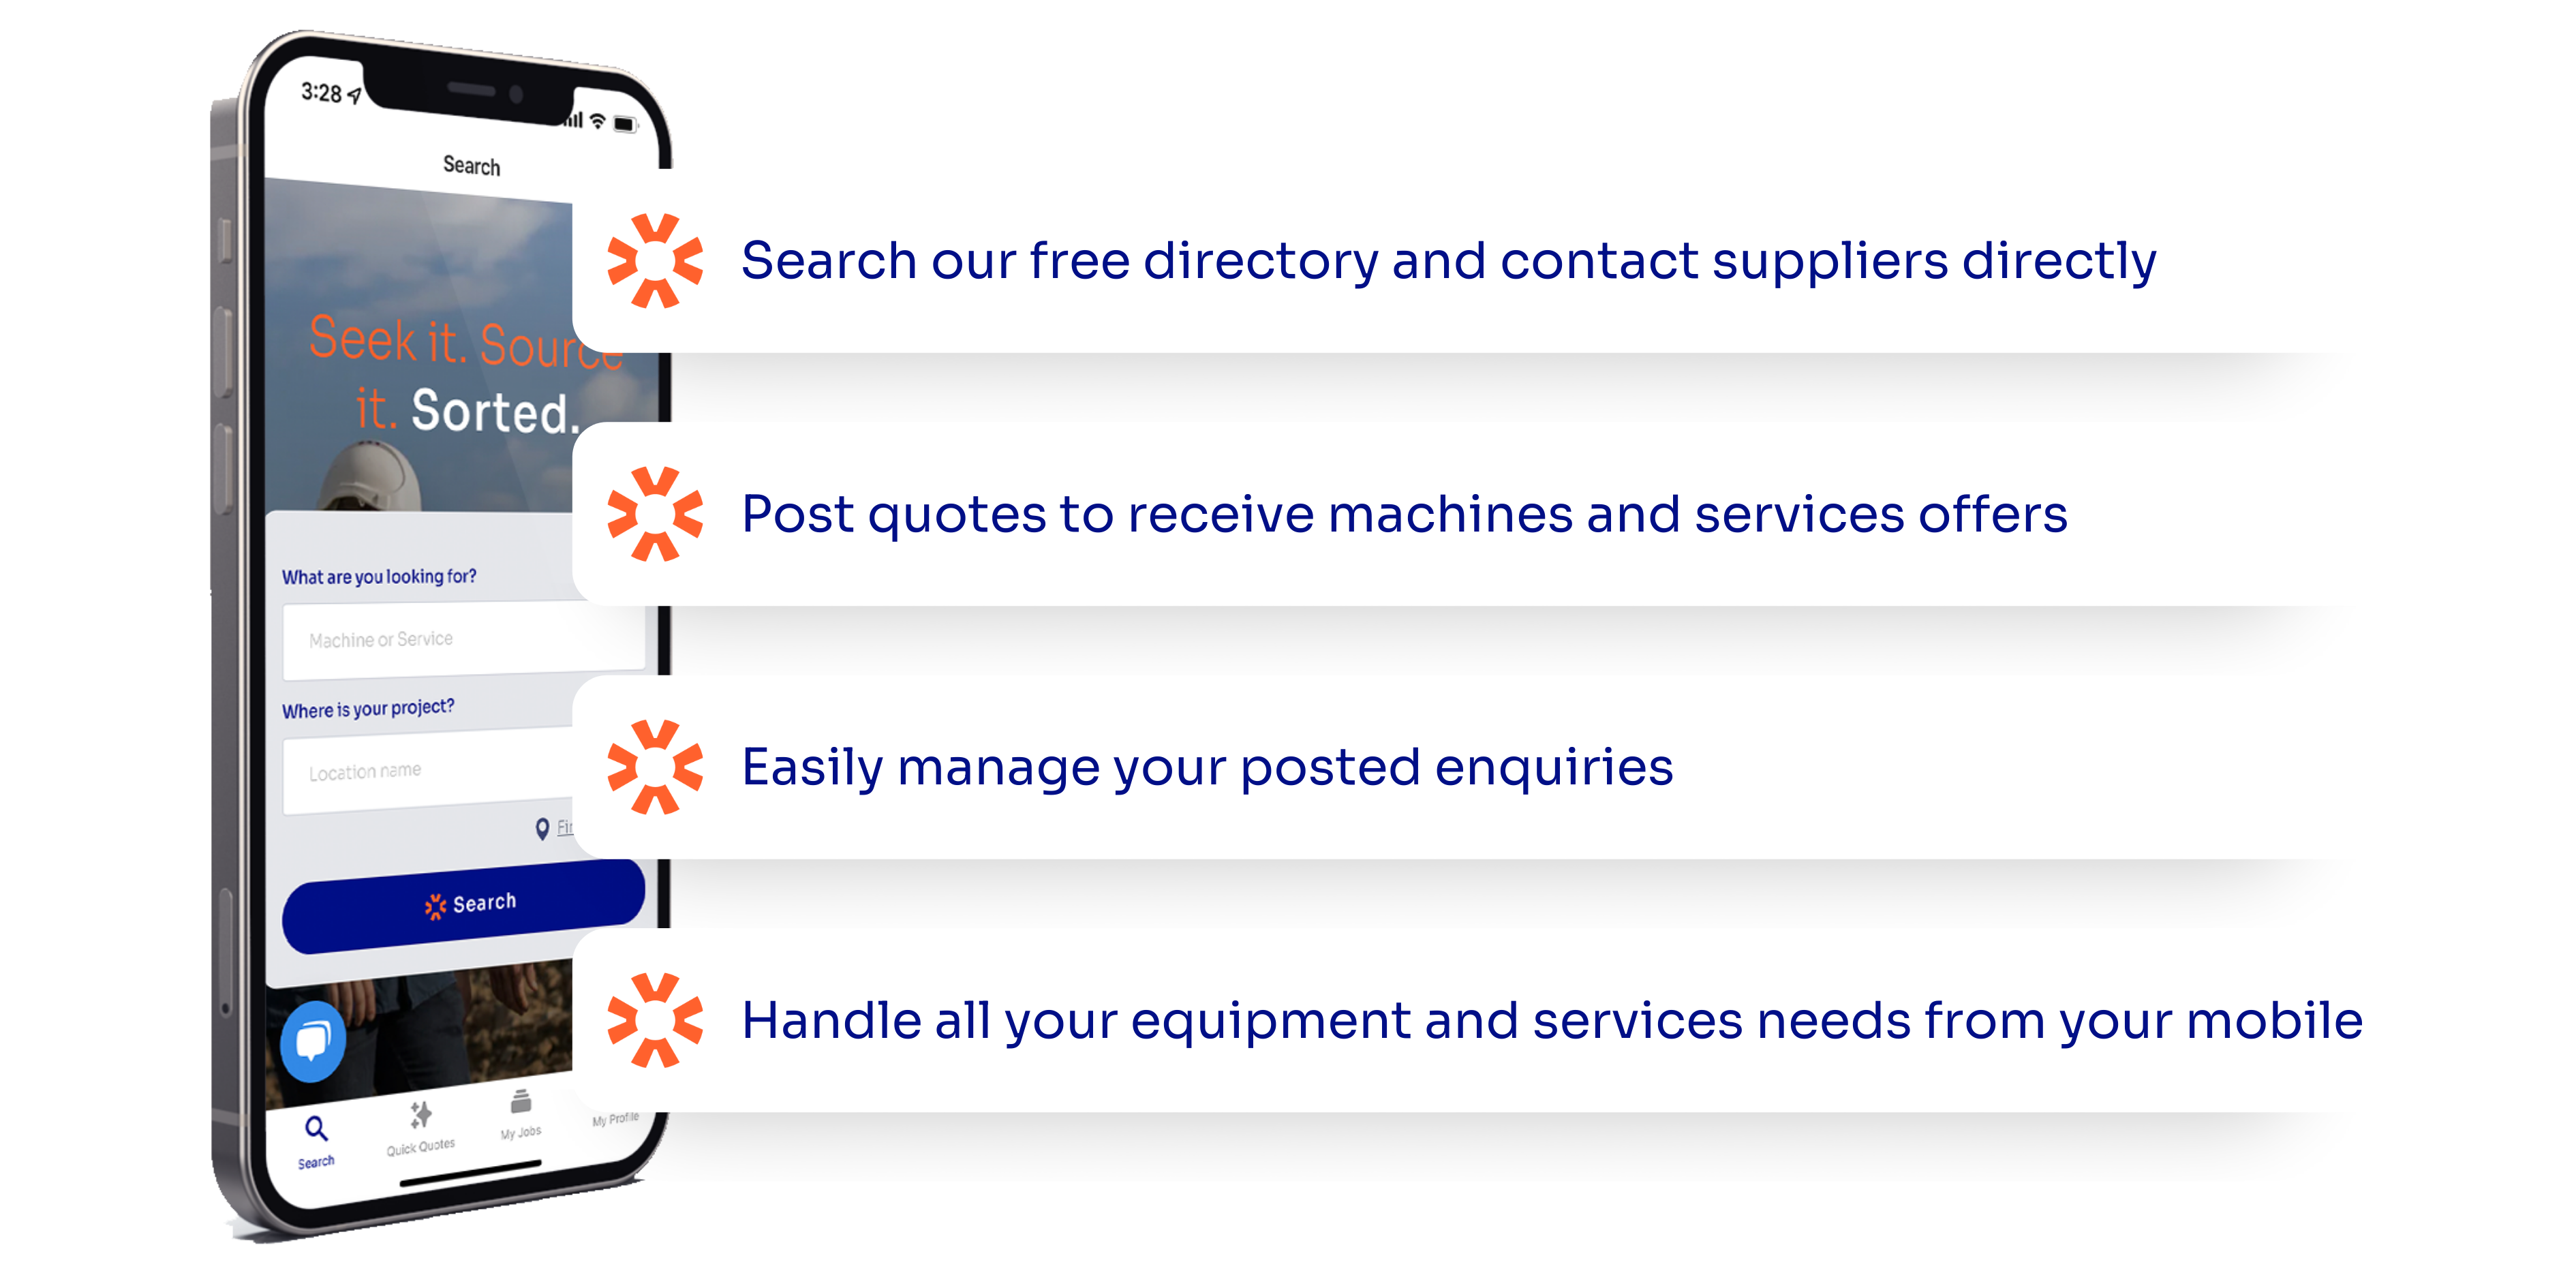 Search our free directory and contact suppliers directly (8)